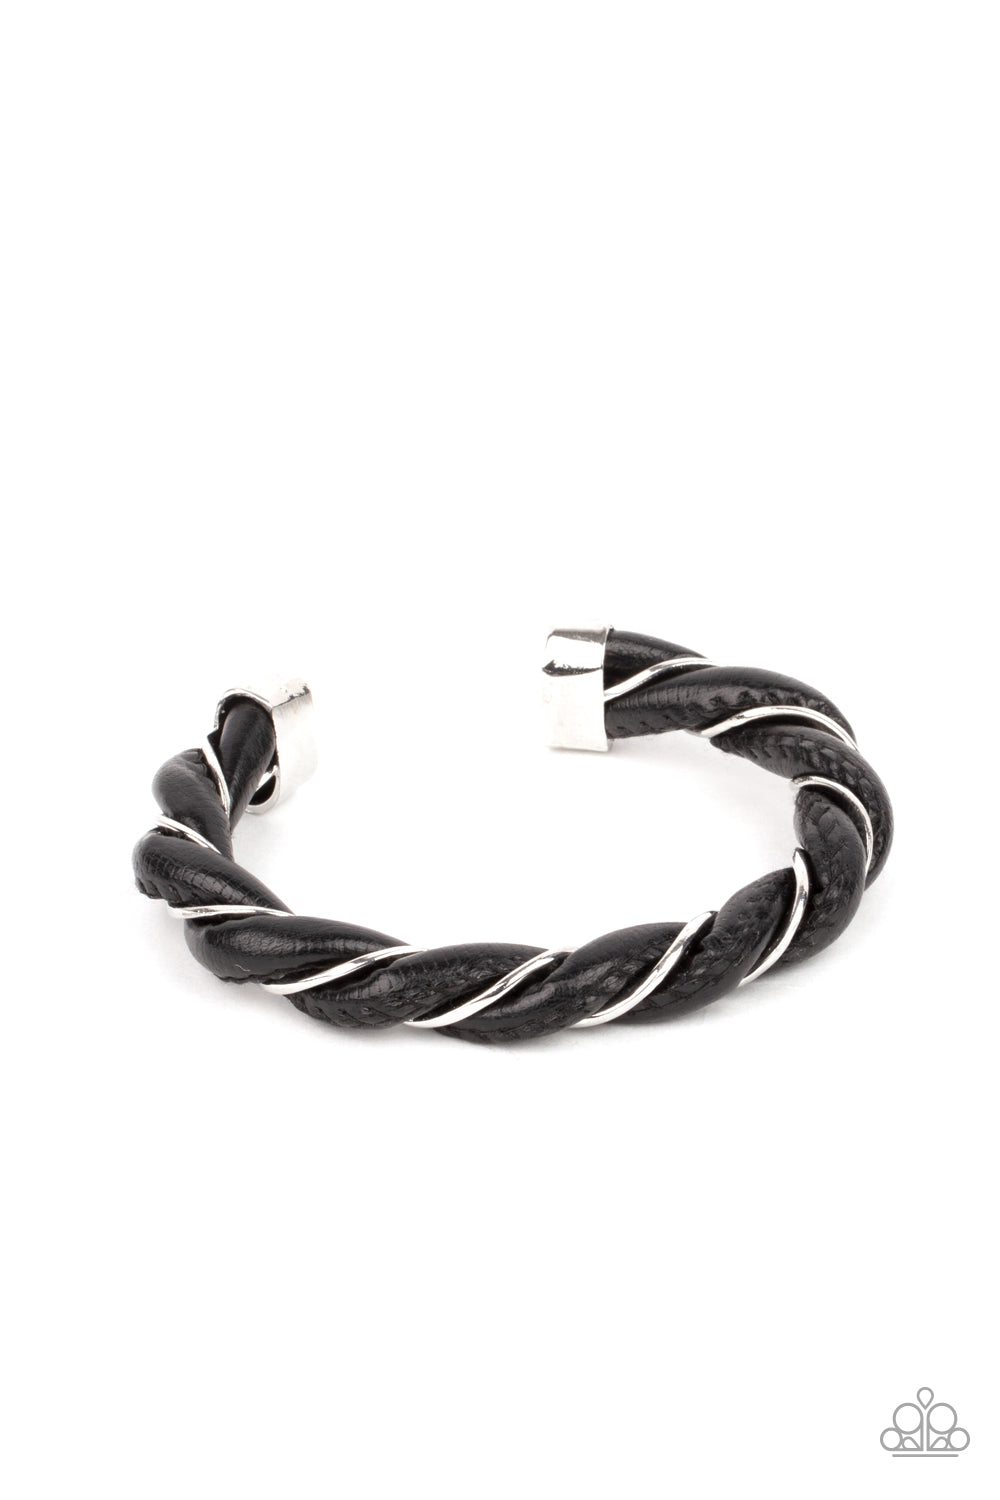 Capped in bold silver fittings, a dainty silver wire and a black leathery cord spin into an edgy cuff around the wrist.